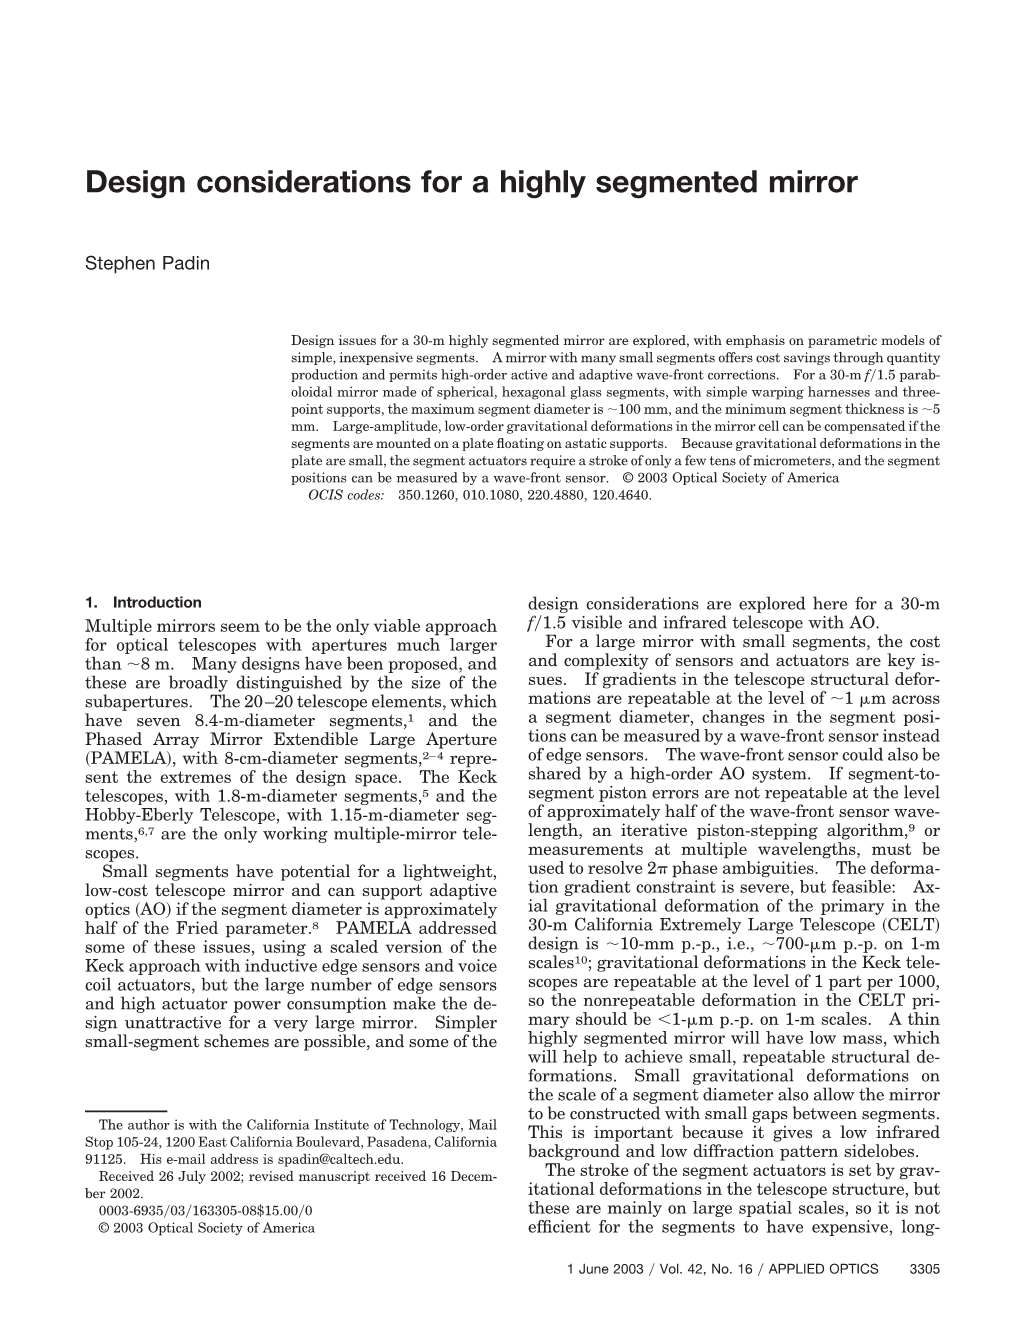 Design Considerations for a Highly Segmented Mirror